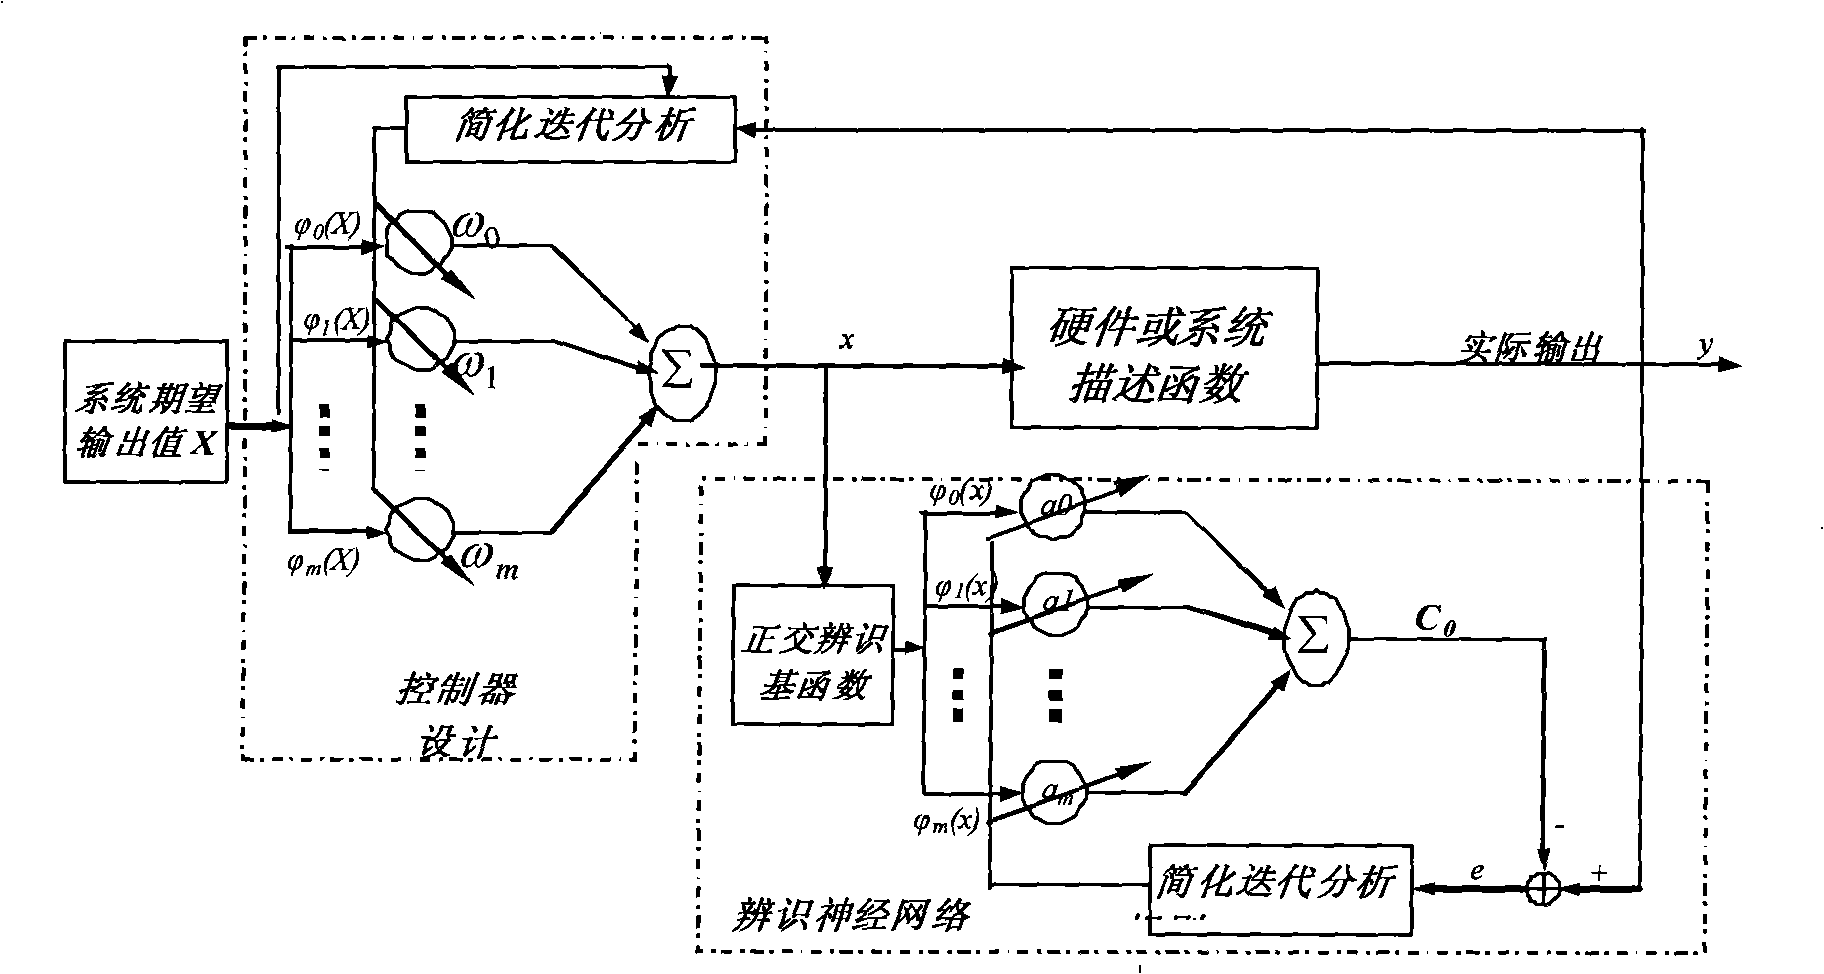 System controller structure of neural net and system identification structure